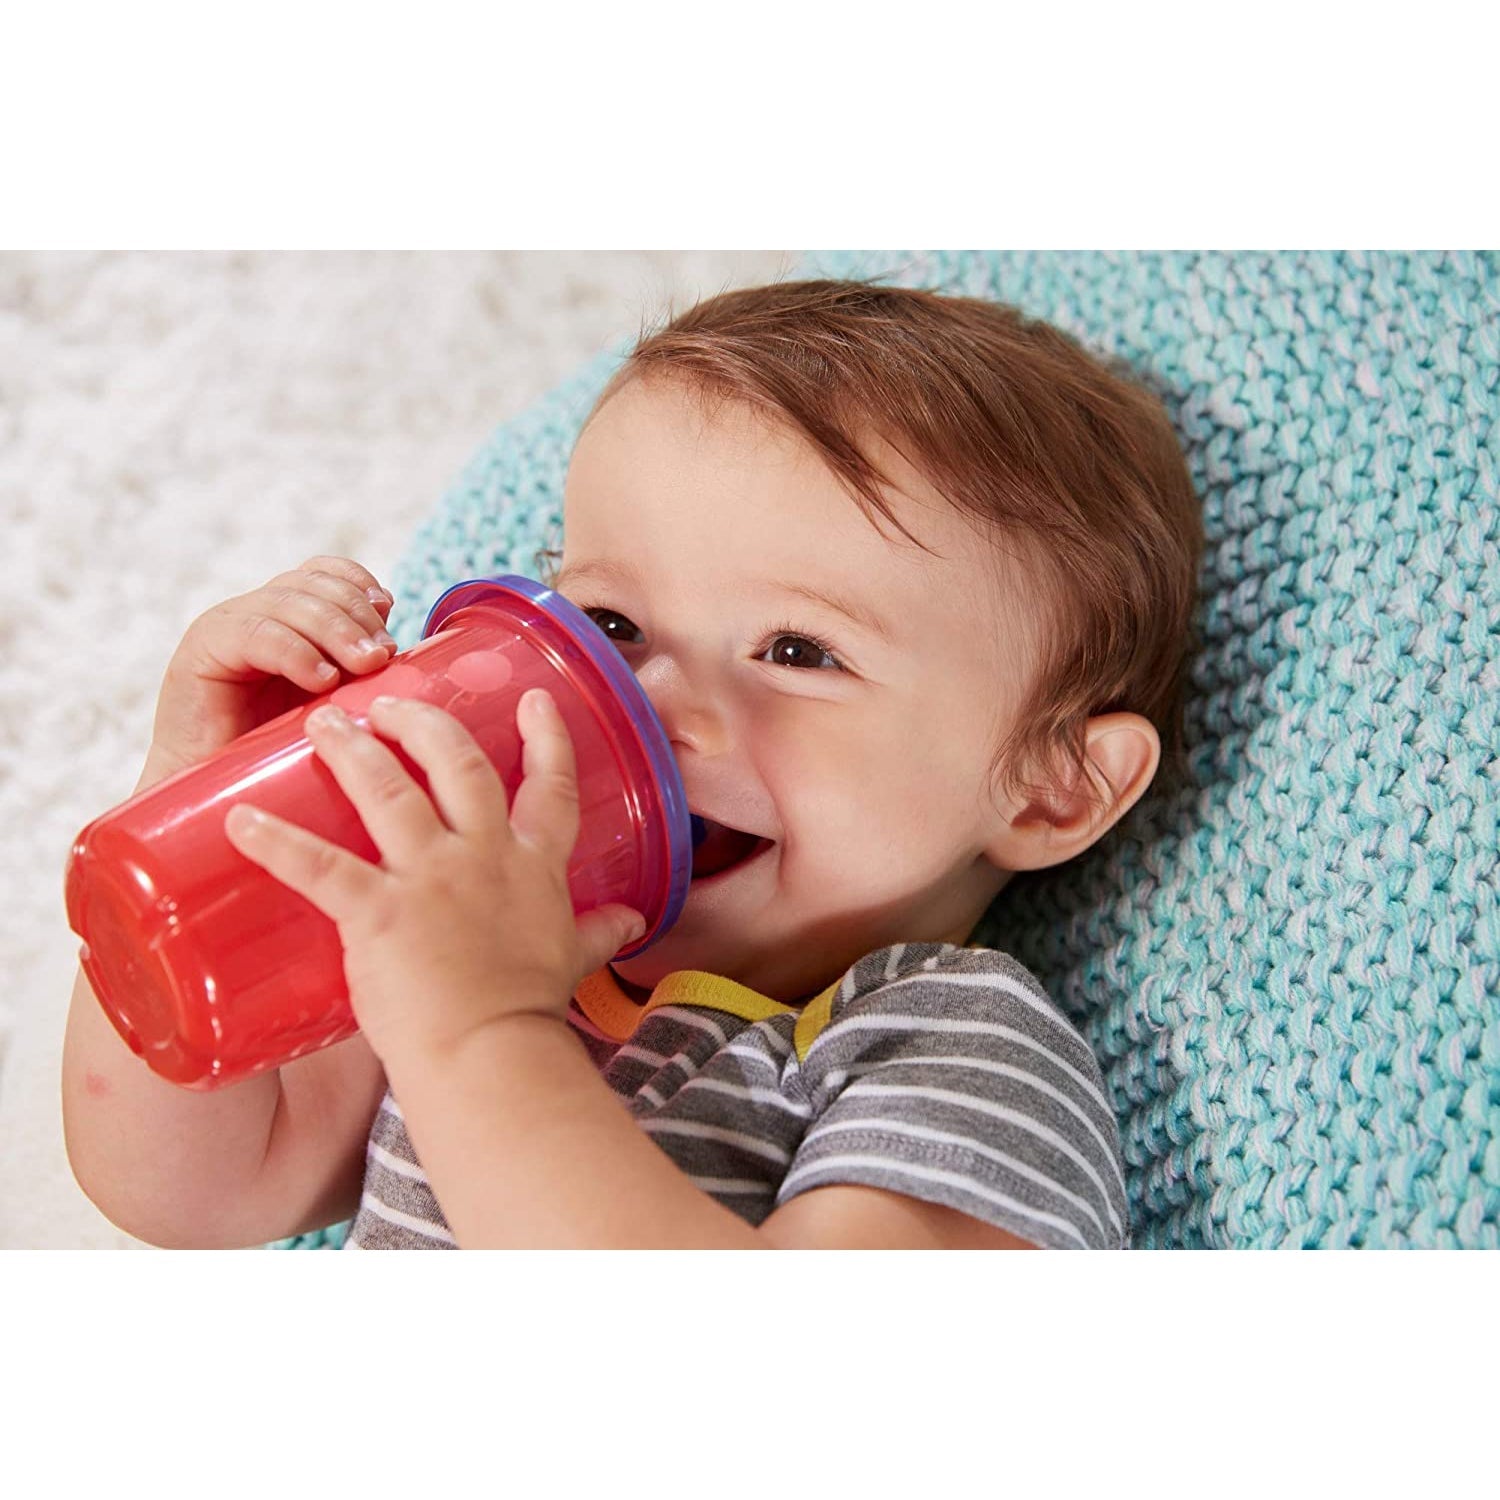 The First Years Take & Toss Sippy Cups Value Set - 20 Pack, Rainbow